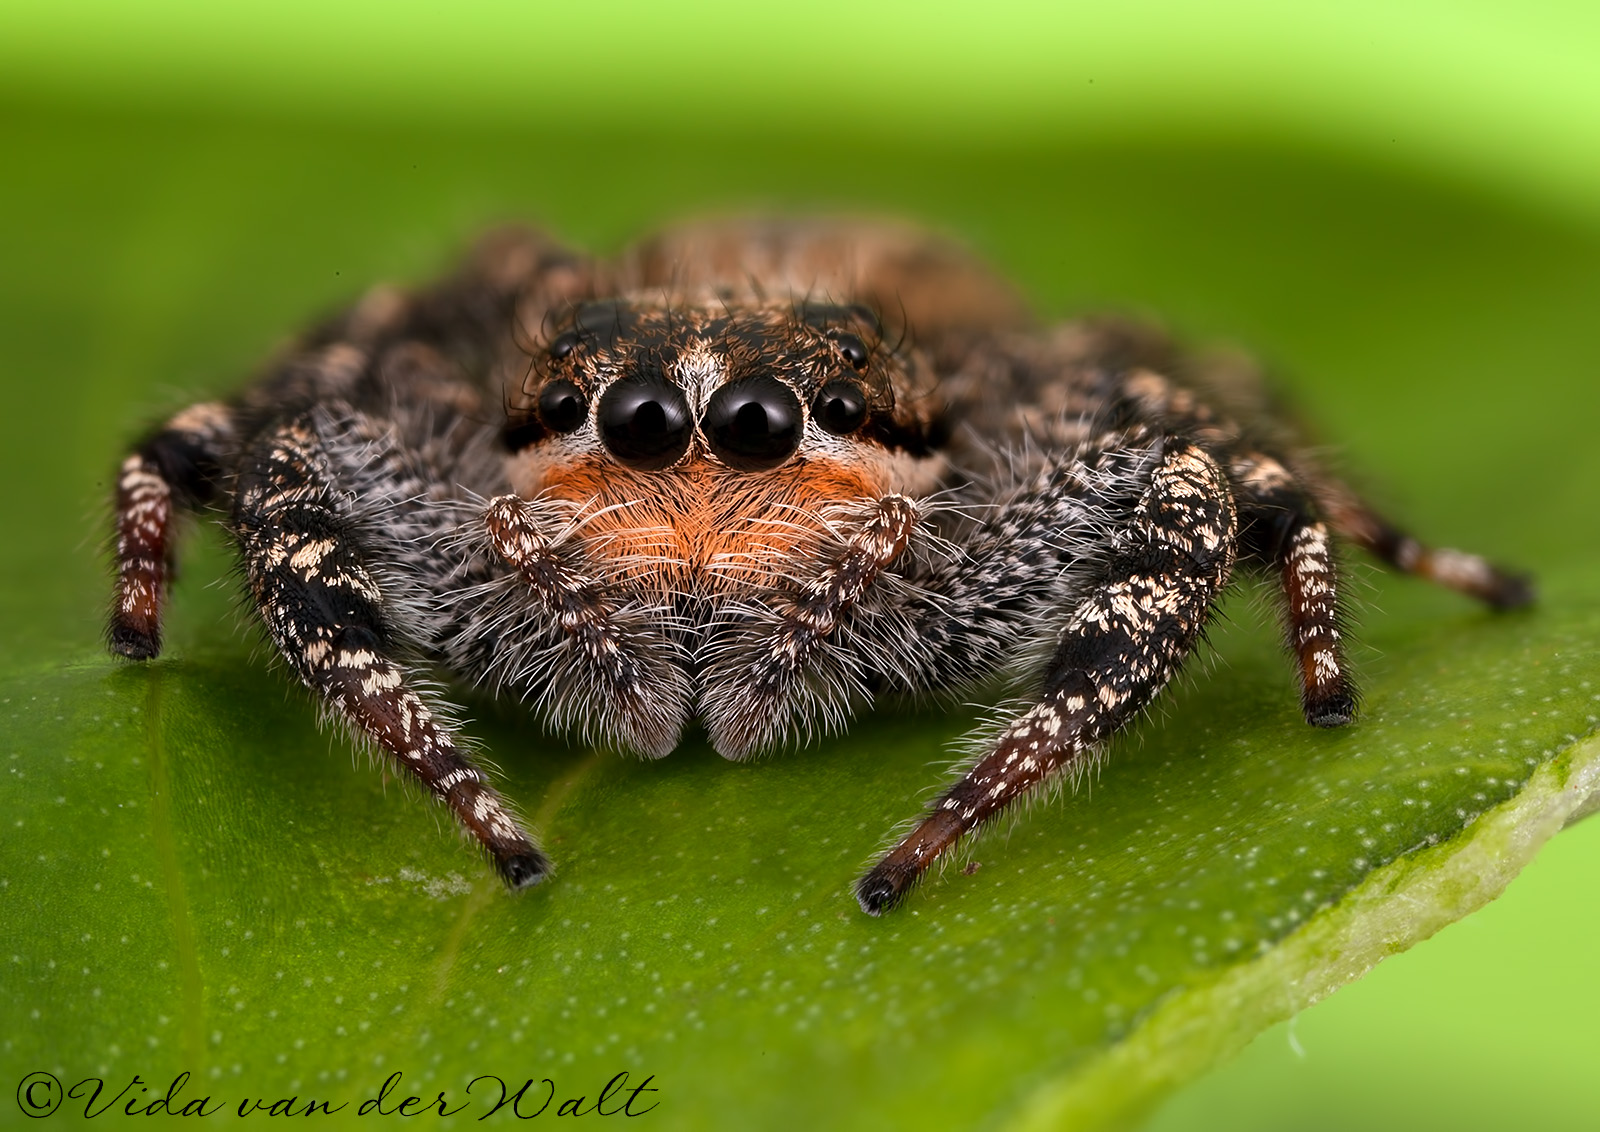 http://www.jumpingspiders.co.za/images/main/79.jpg